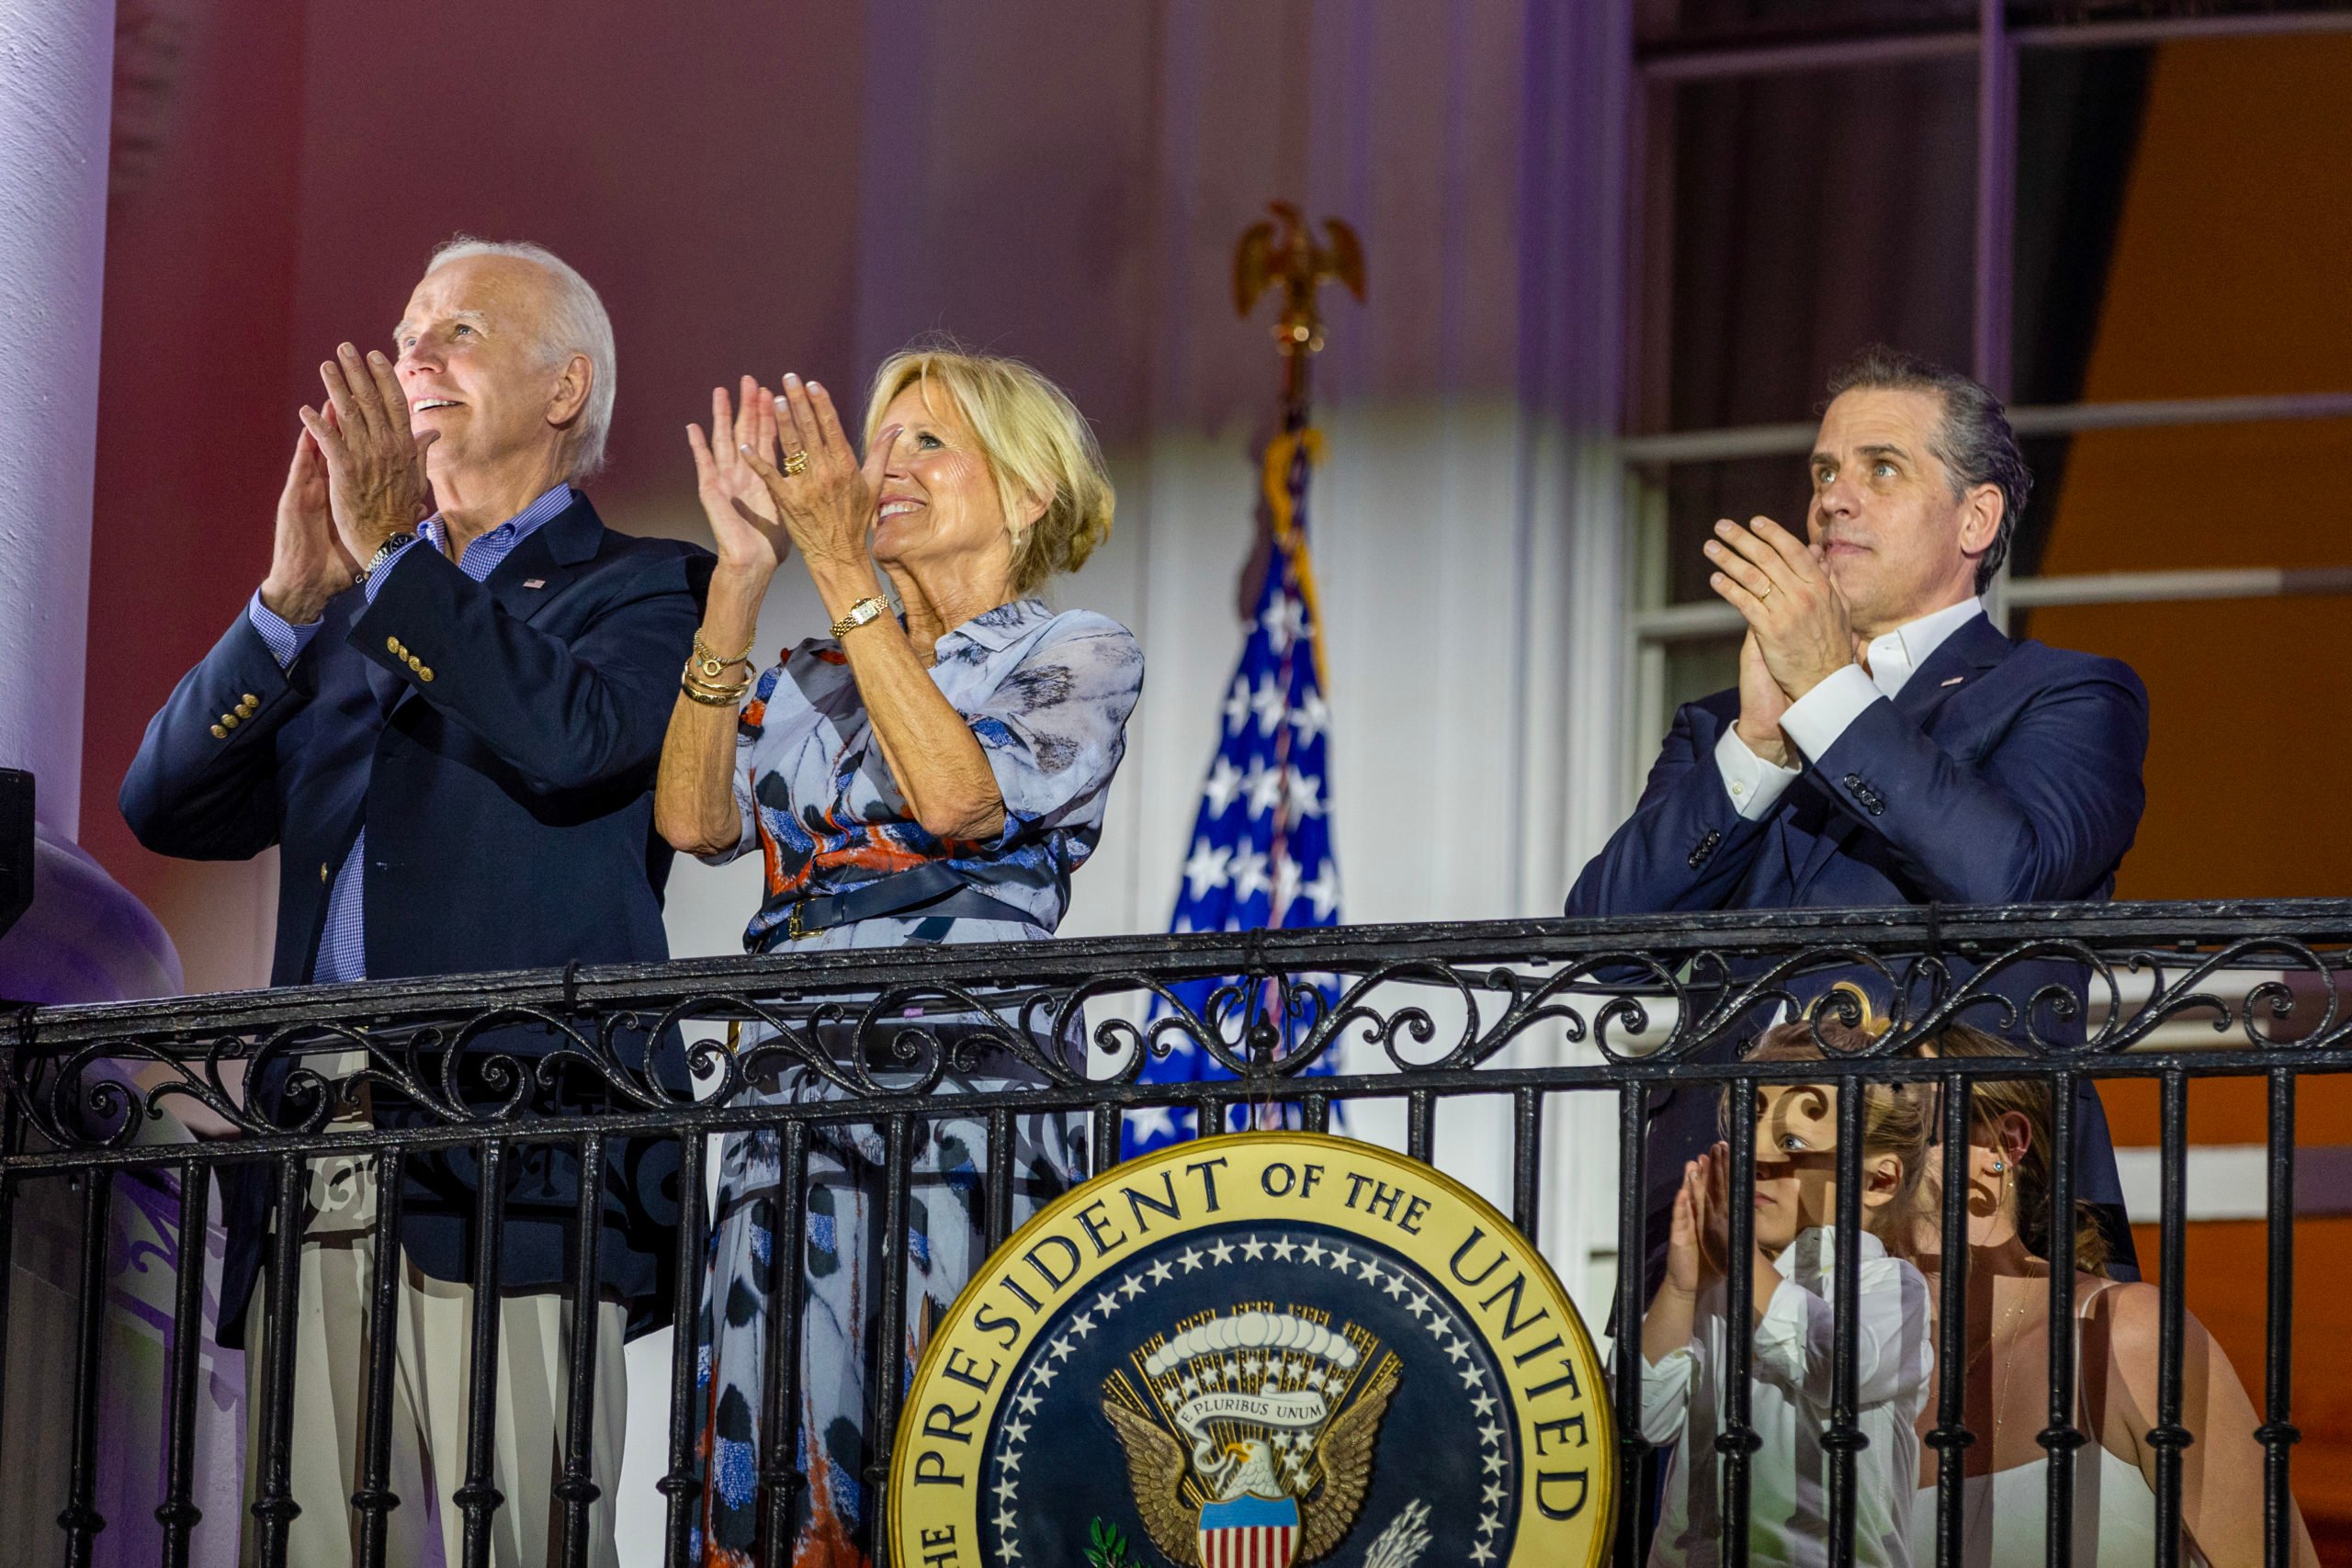 WASHINGTON, DC - JULY 04: (L-R) President Joe Biden, first lady Jill Biden and Hunter Biden watch fireworks on the South Lawn of the White House on July 04, 2023 in Washington, DC. The Bidens hosted a Fourth of July BBQ and concert with military families and other guests on the South Lawn of the White House. (Photo by Tasos Katopodis/Getty Images)